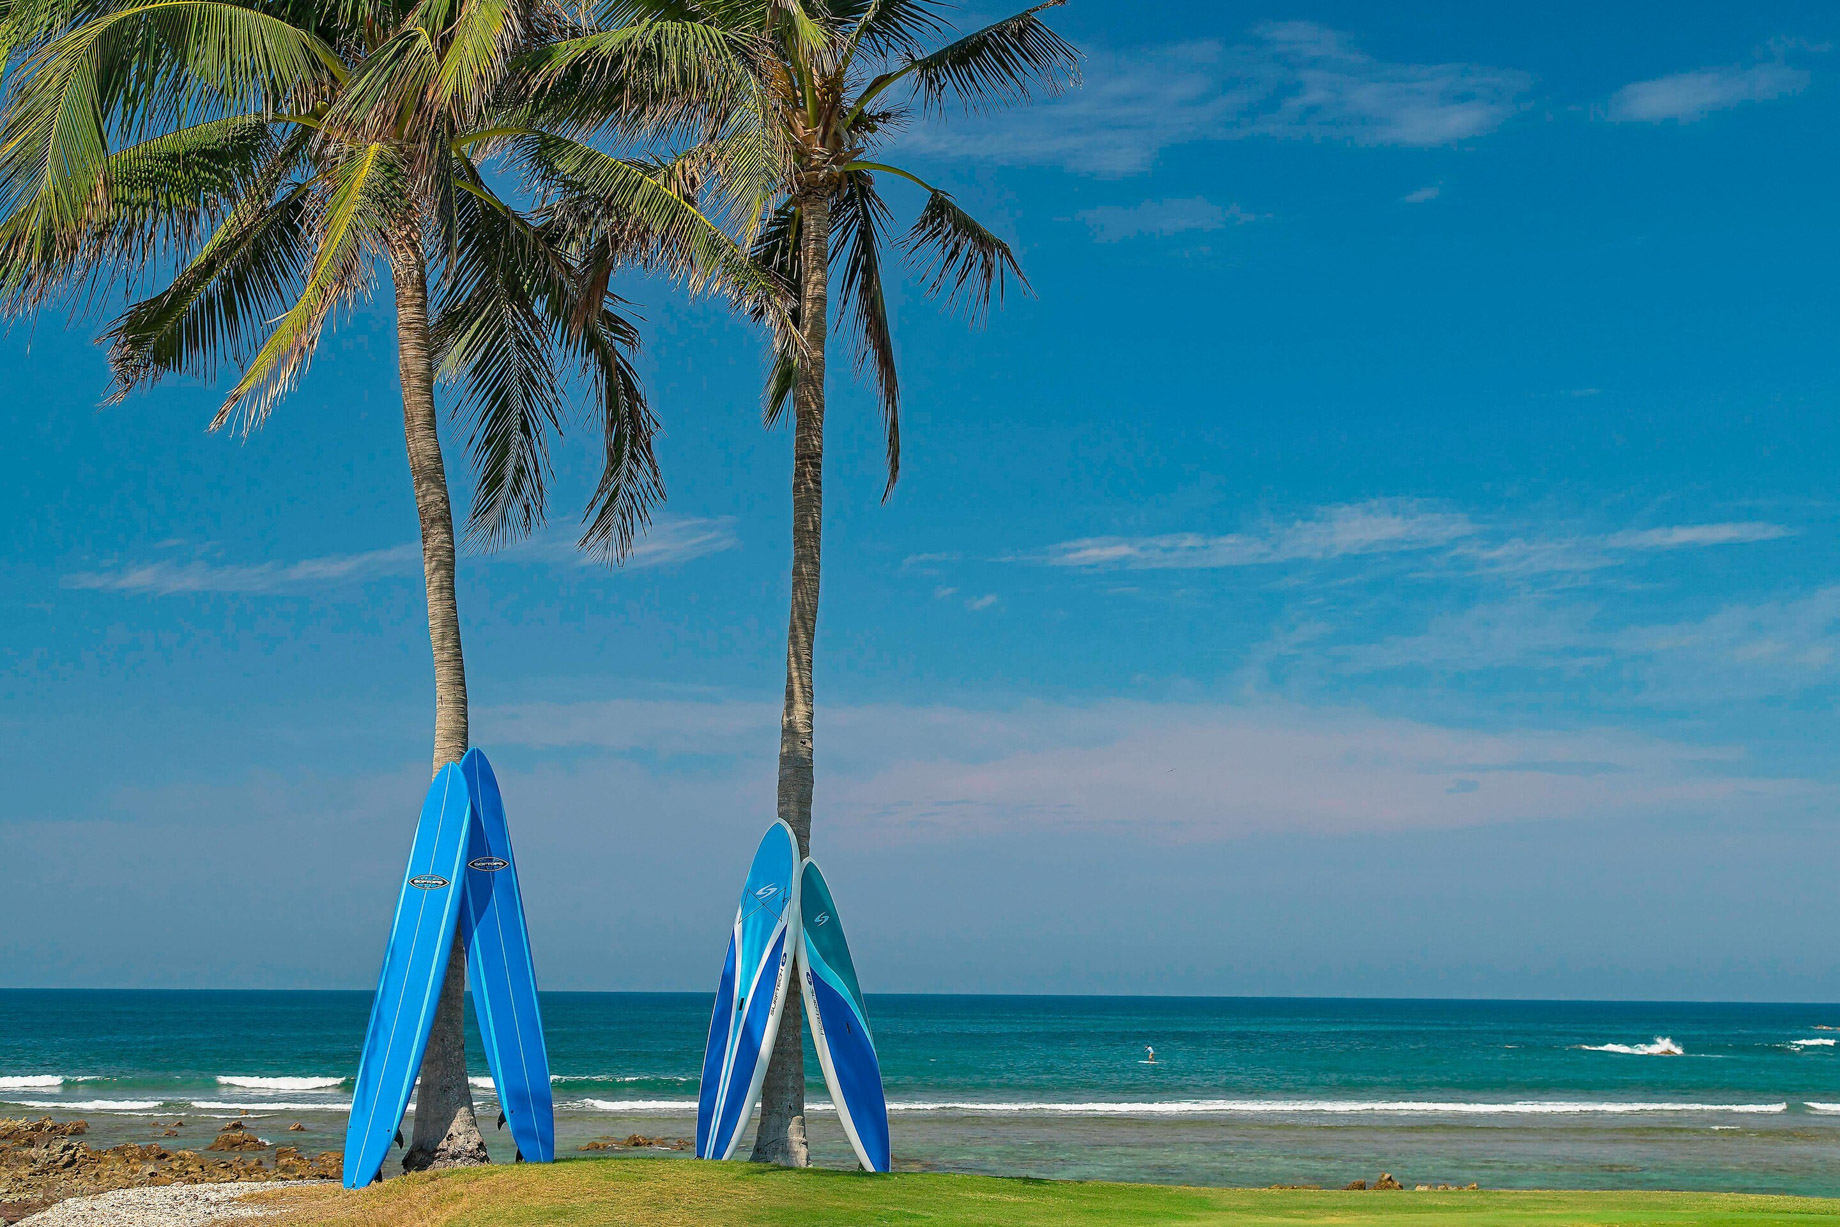 The St. Regis Punta Mita Resort - Nayarit, Mexico - Surf and Stand Up Paddle Boards